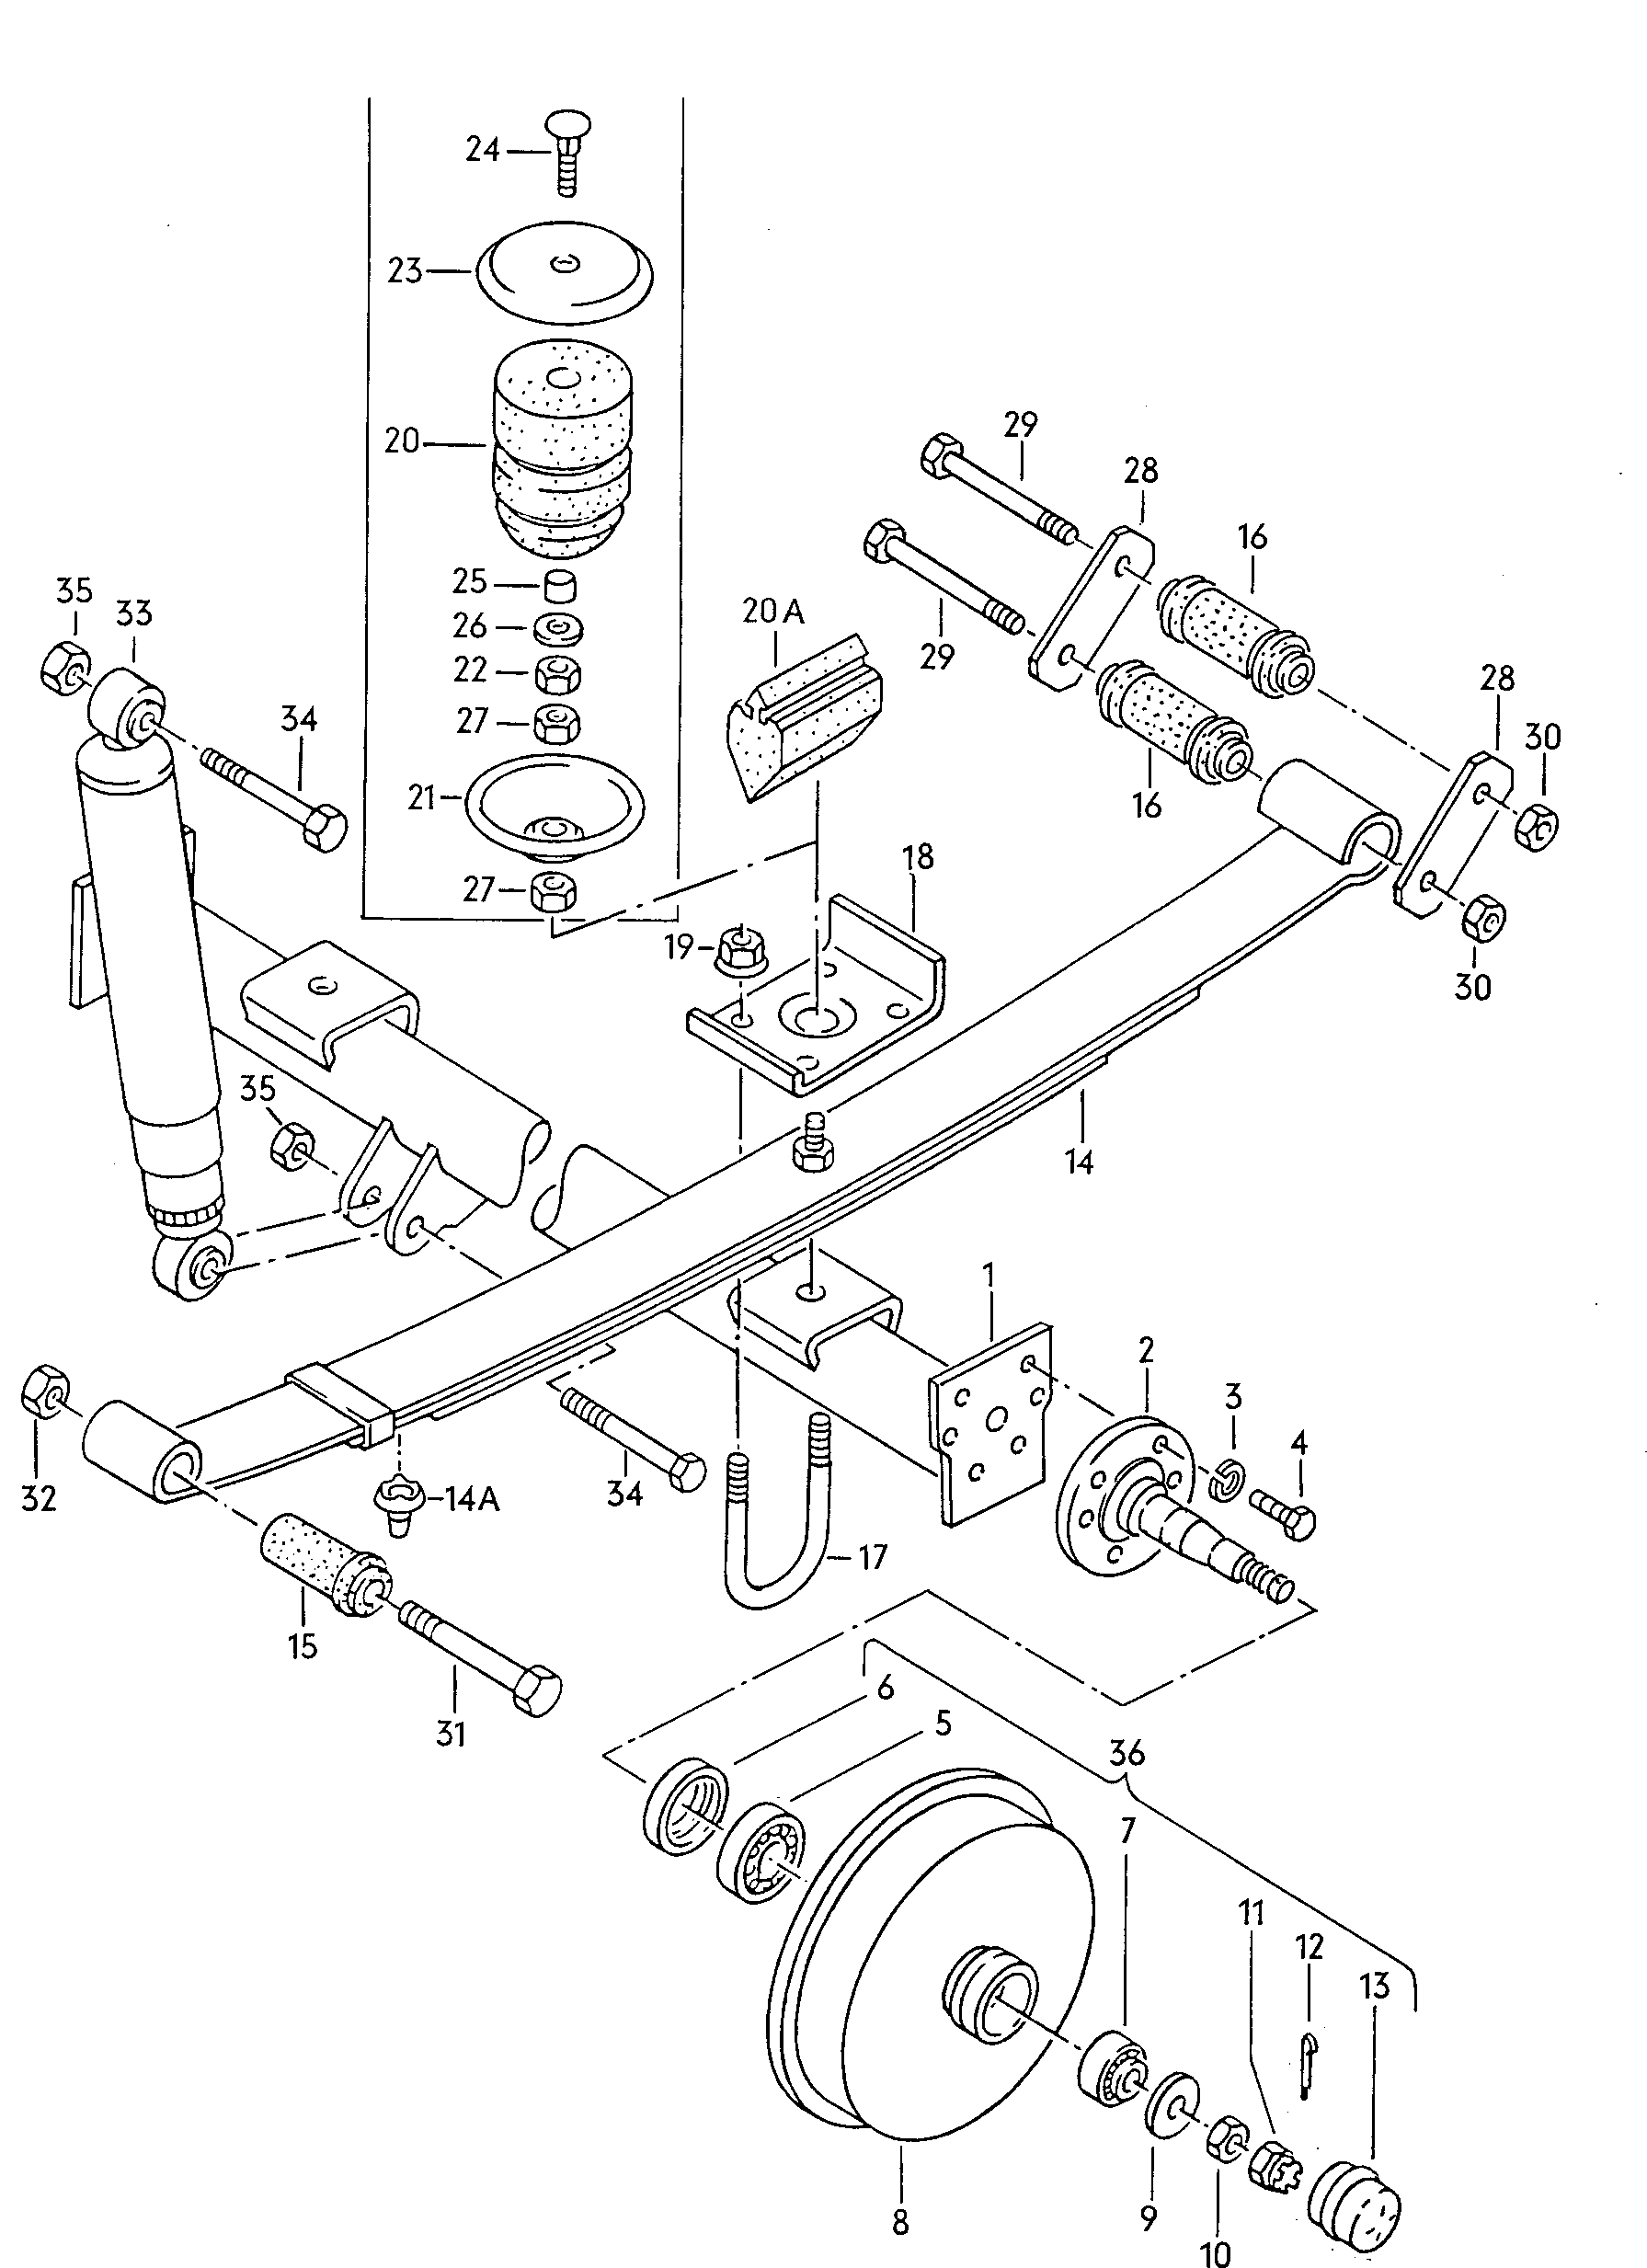 rear axle beam with attachment
parts; suspension - Caddy(CA)  